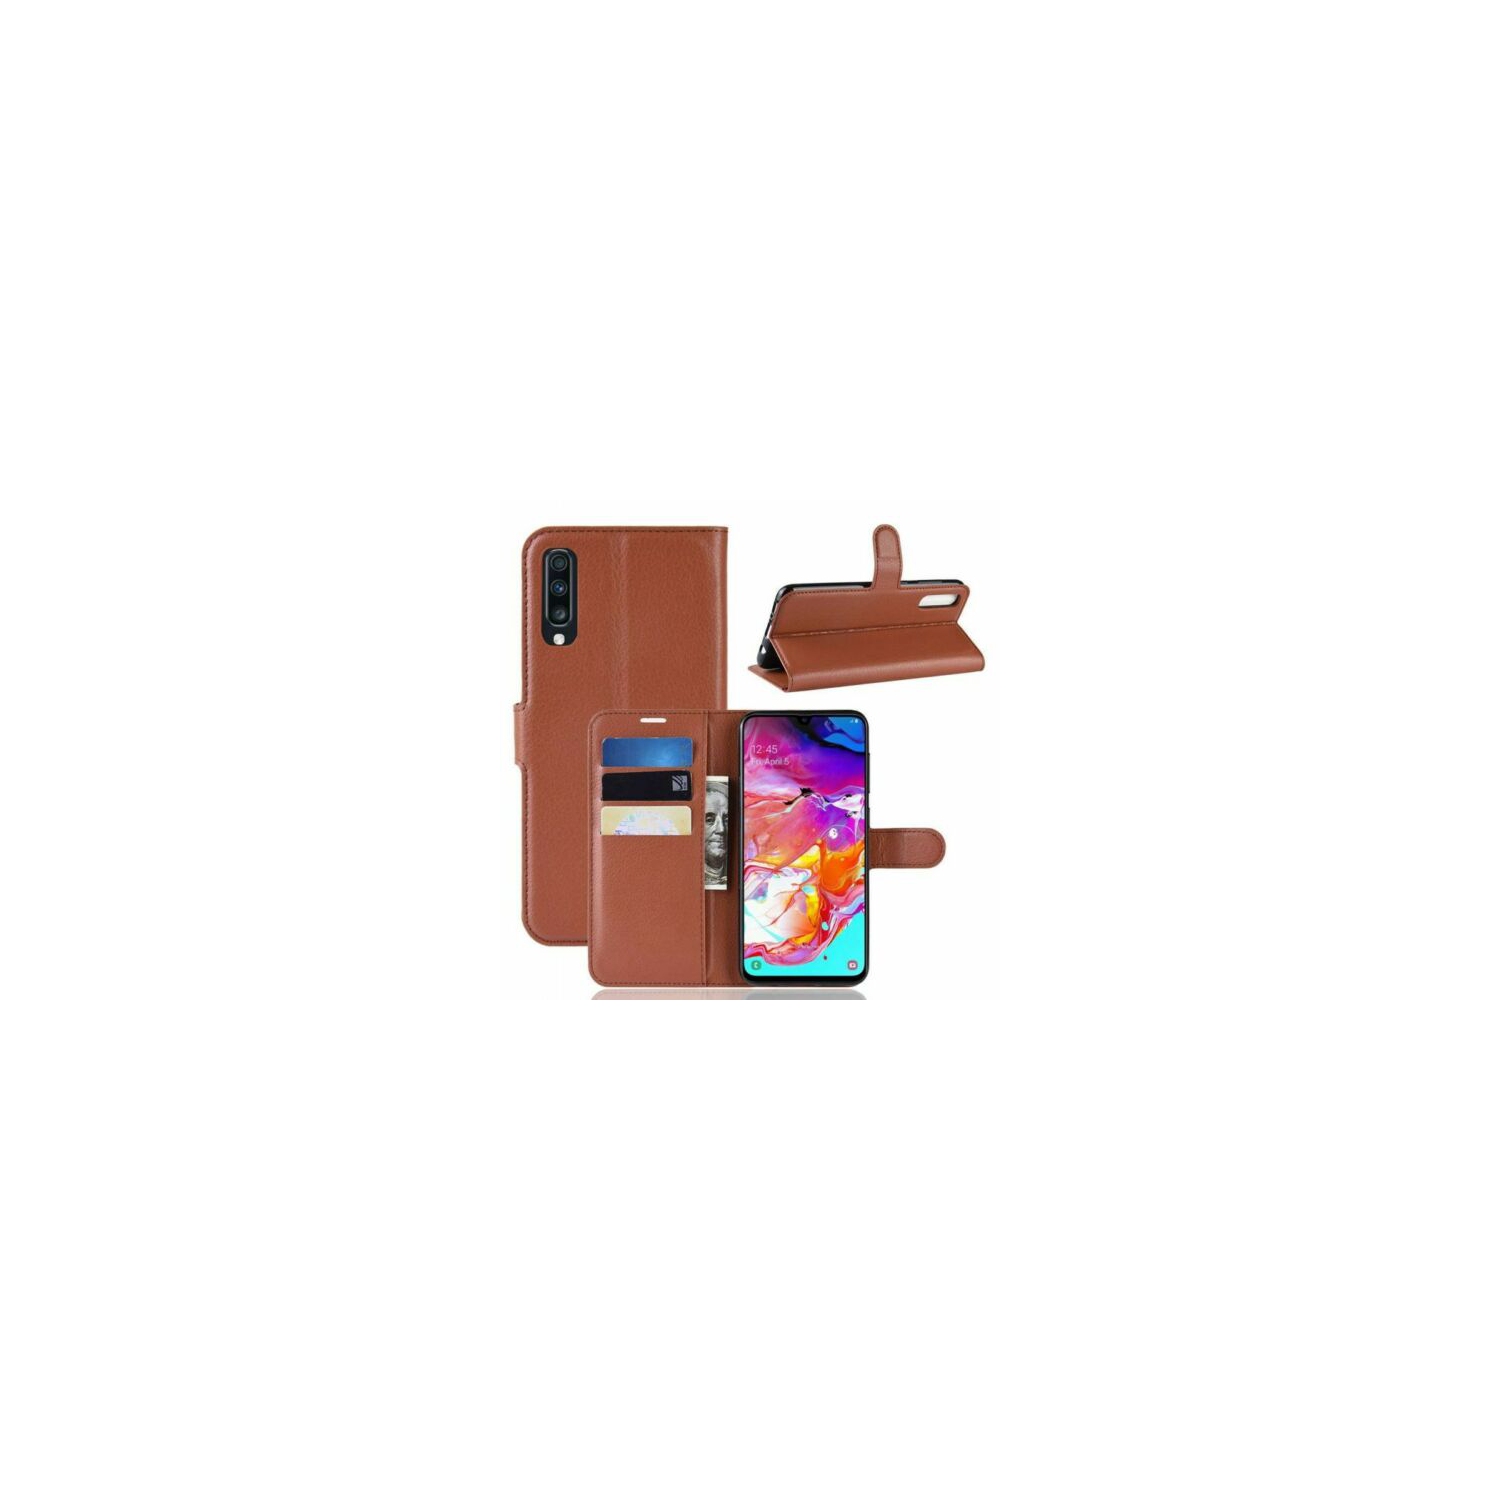 【CSmart】 Magnetic Card Slot Leather Folio Wallet Flip Case Cover for Samsung A50 / A50s / A30s, Brown